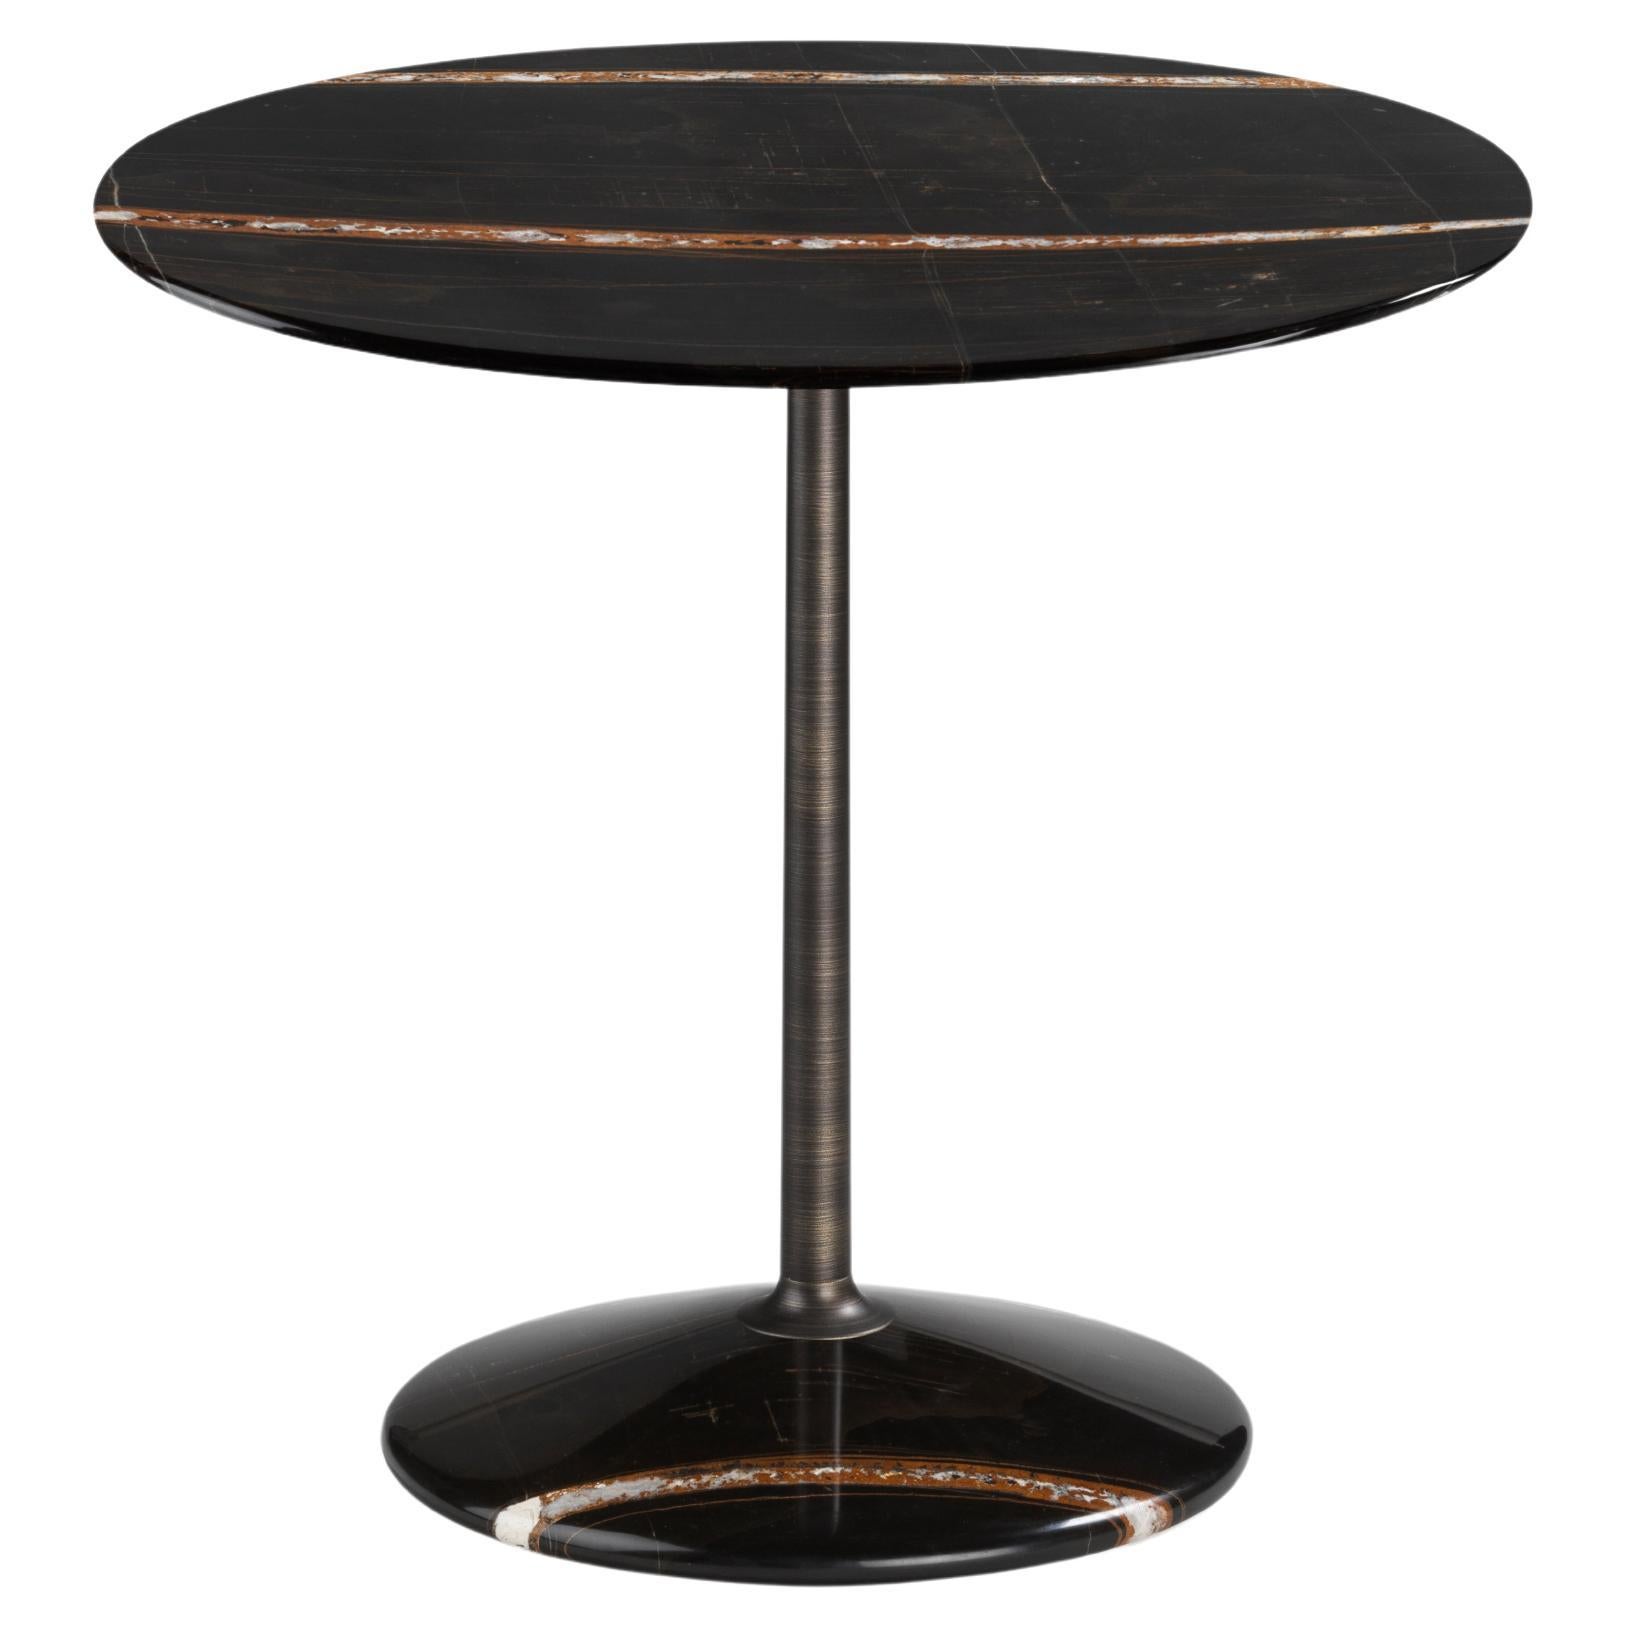 Arnold Short Table, Sahara Noir Top, Burnished Brass Structure, Made in Italy For Sale